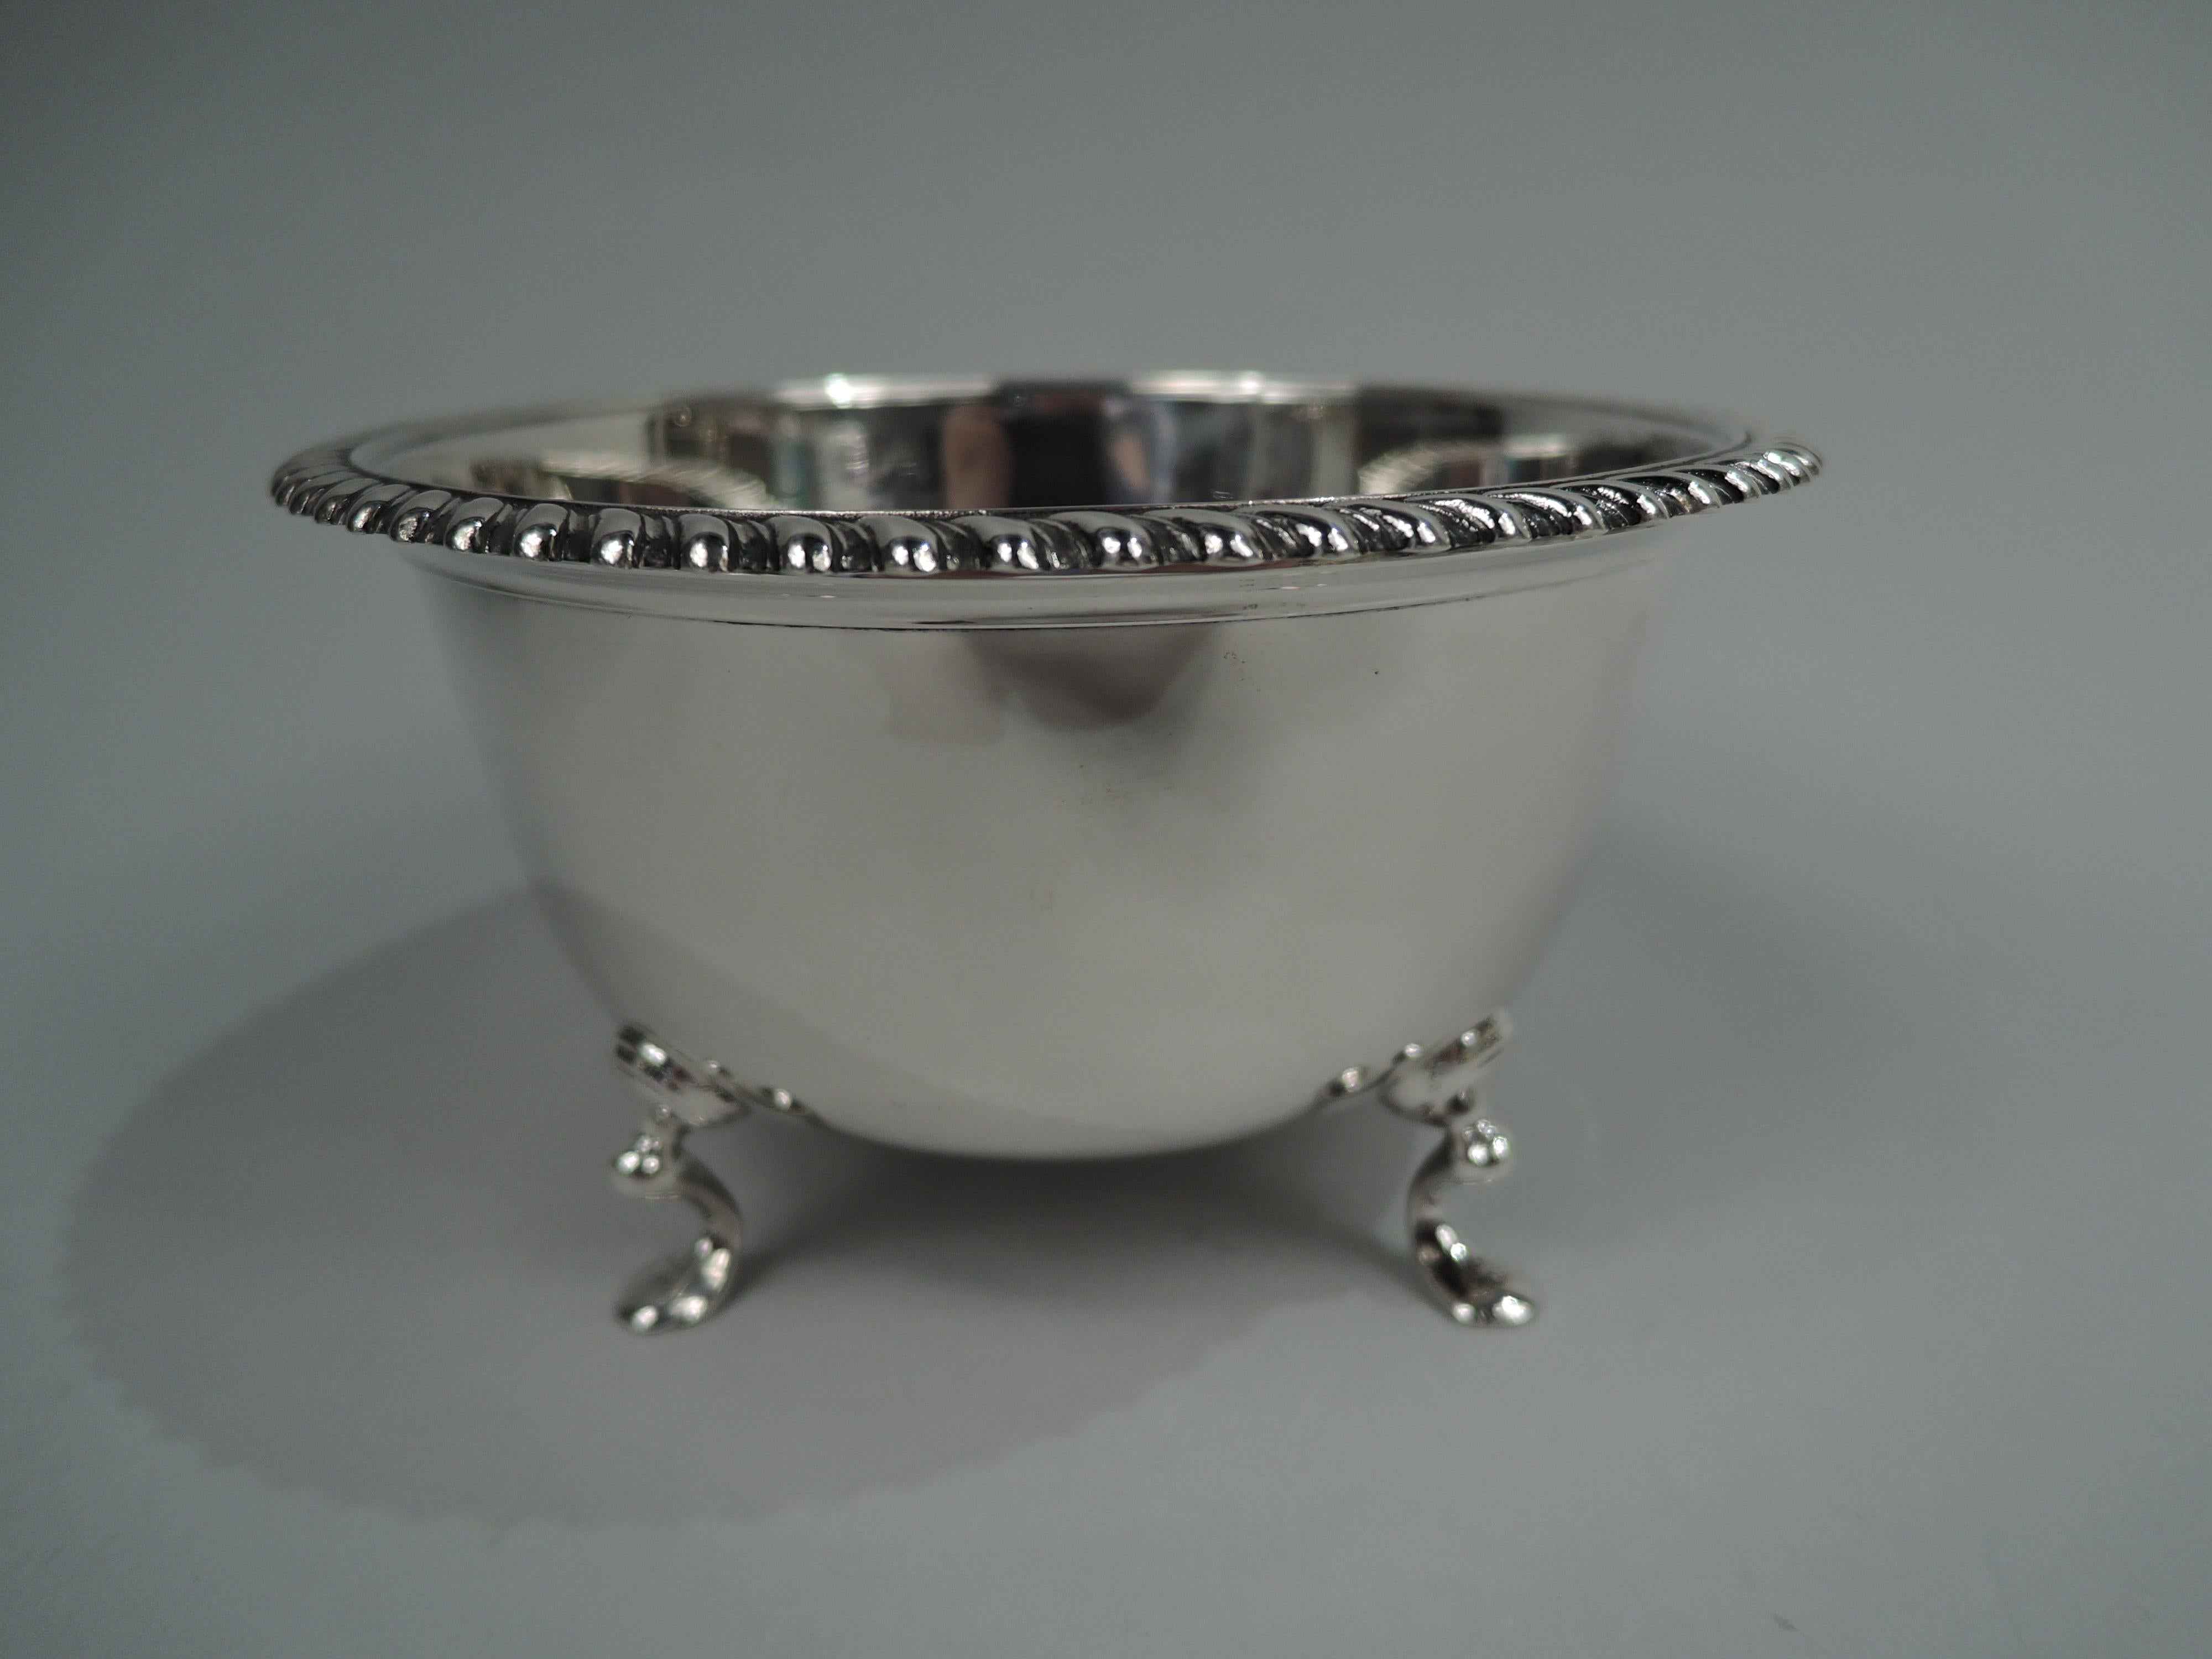 Modern American Georgian sterling silver bowl. Retailed by Cartier in New York. Tapering with curved bottom and flat gadrooned rim; four hoof supports. Fully marked including retailer’s stamp and no. 9576AB. Weight: 6.5 troy ounces.